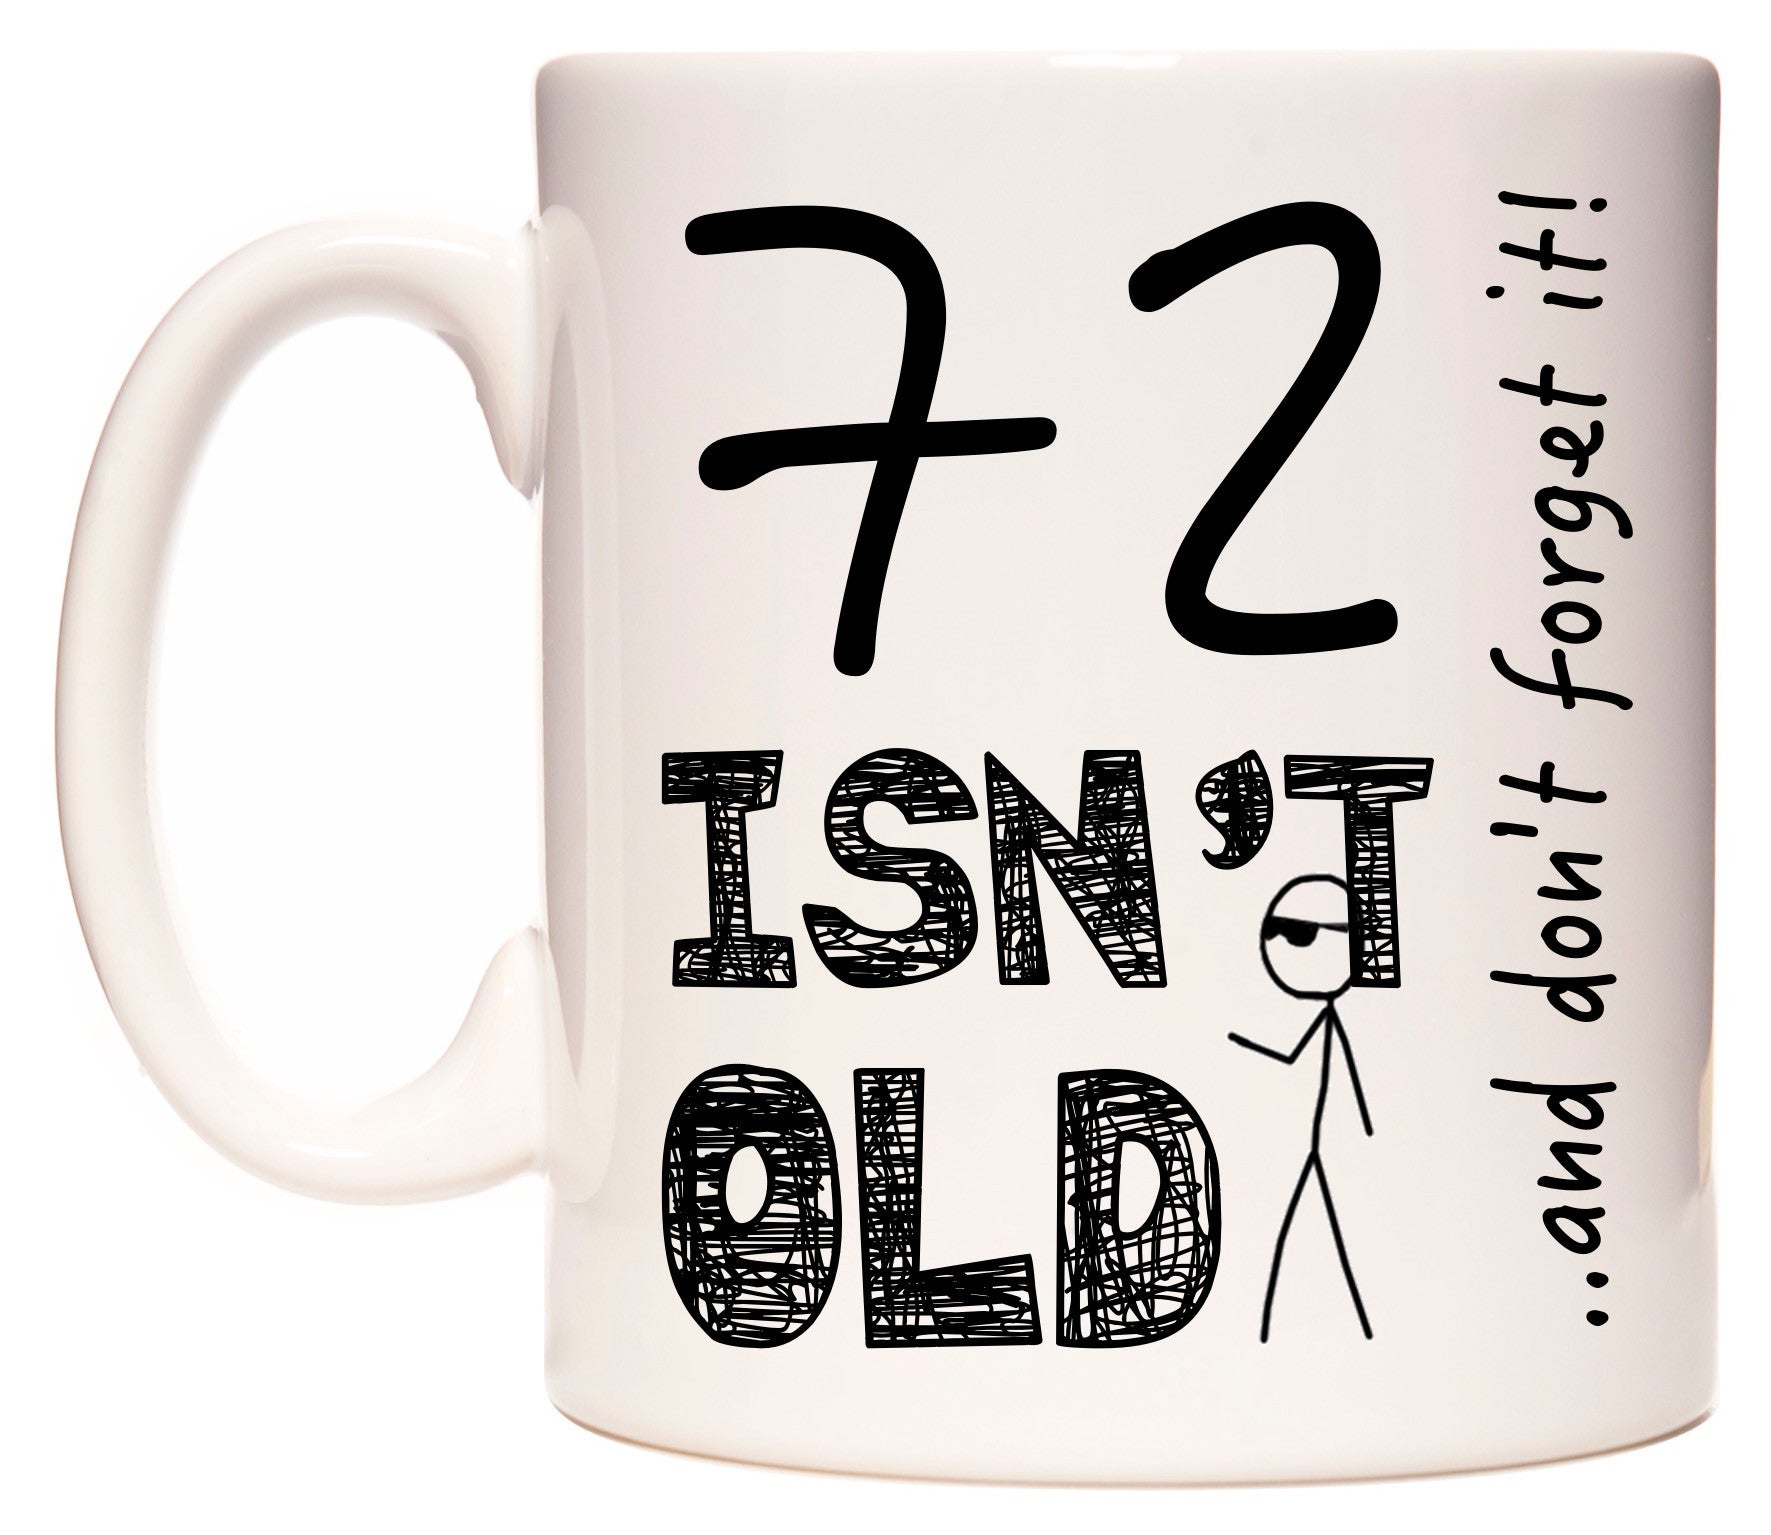 This mug features 72 Isn't Old